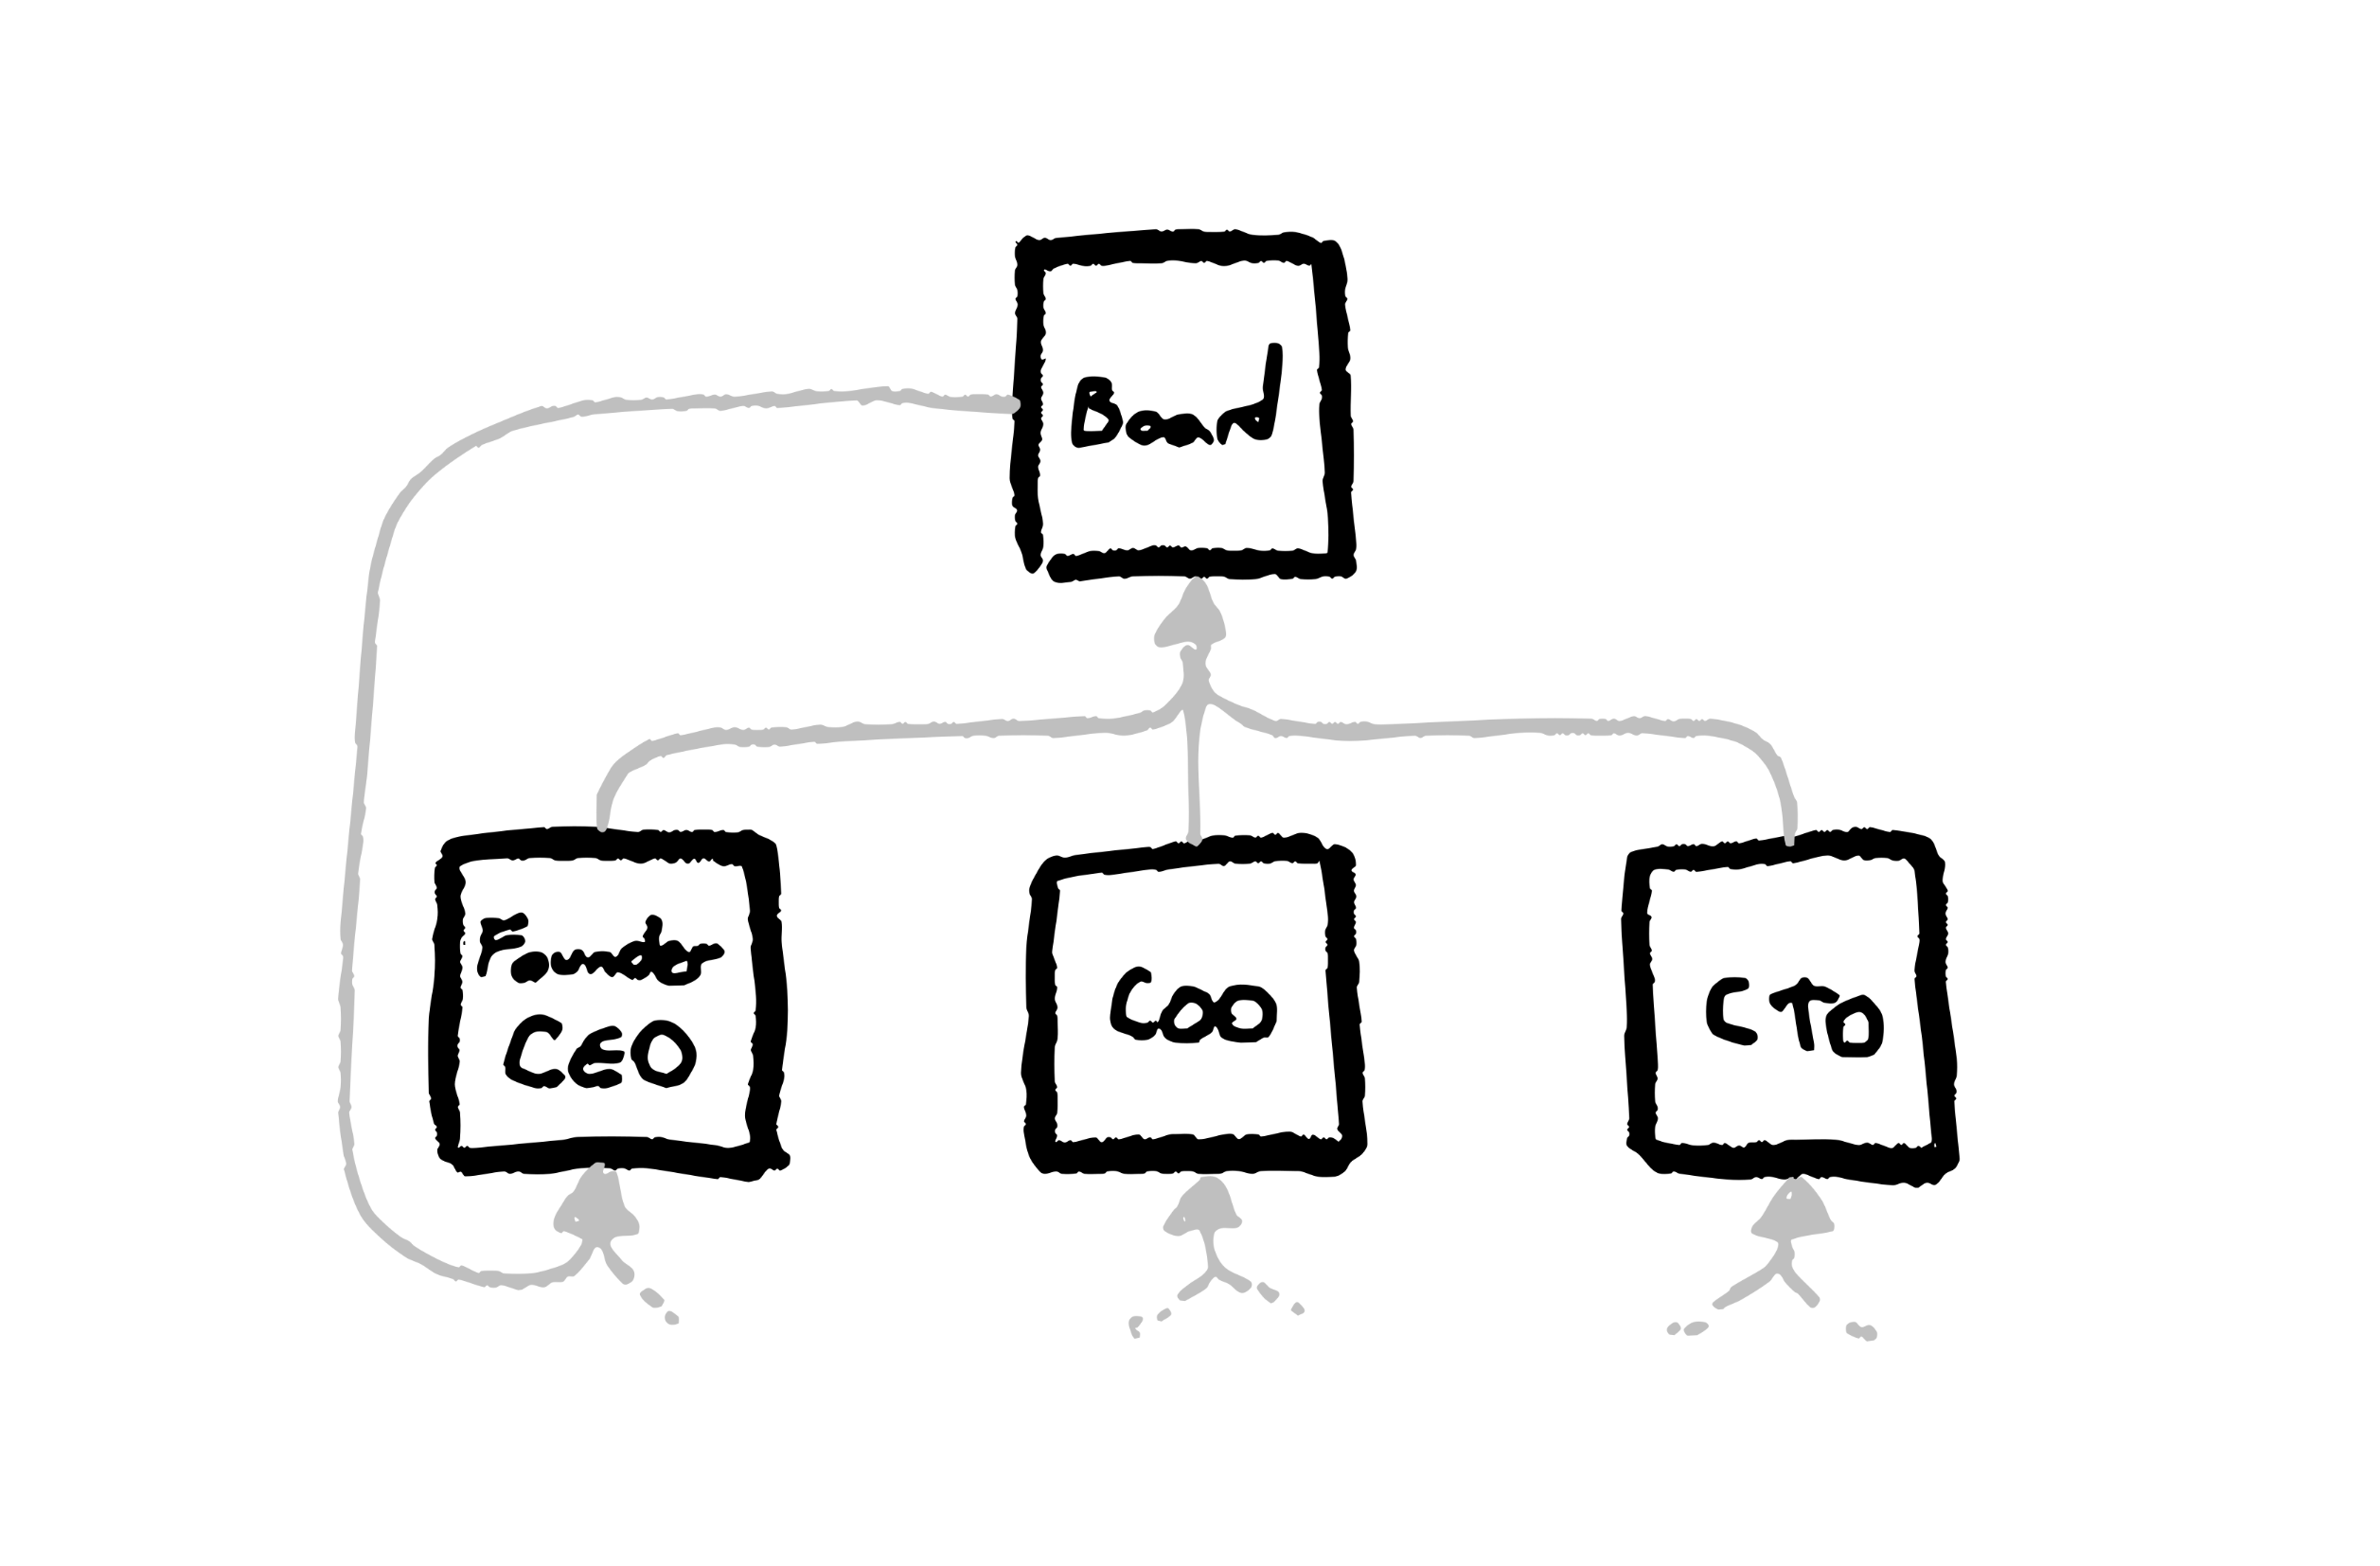 image of an org chart